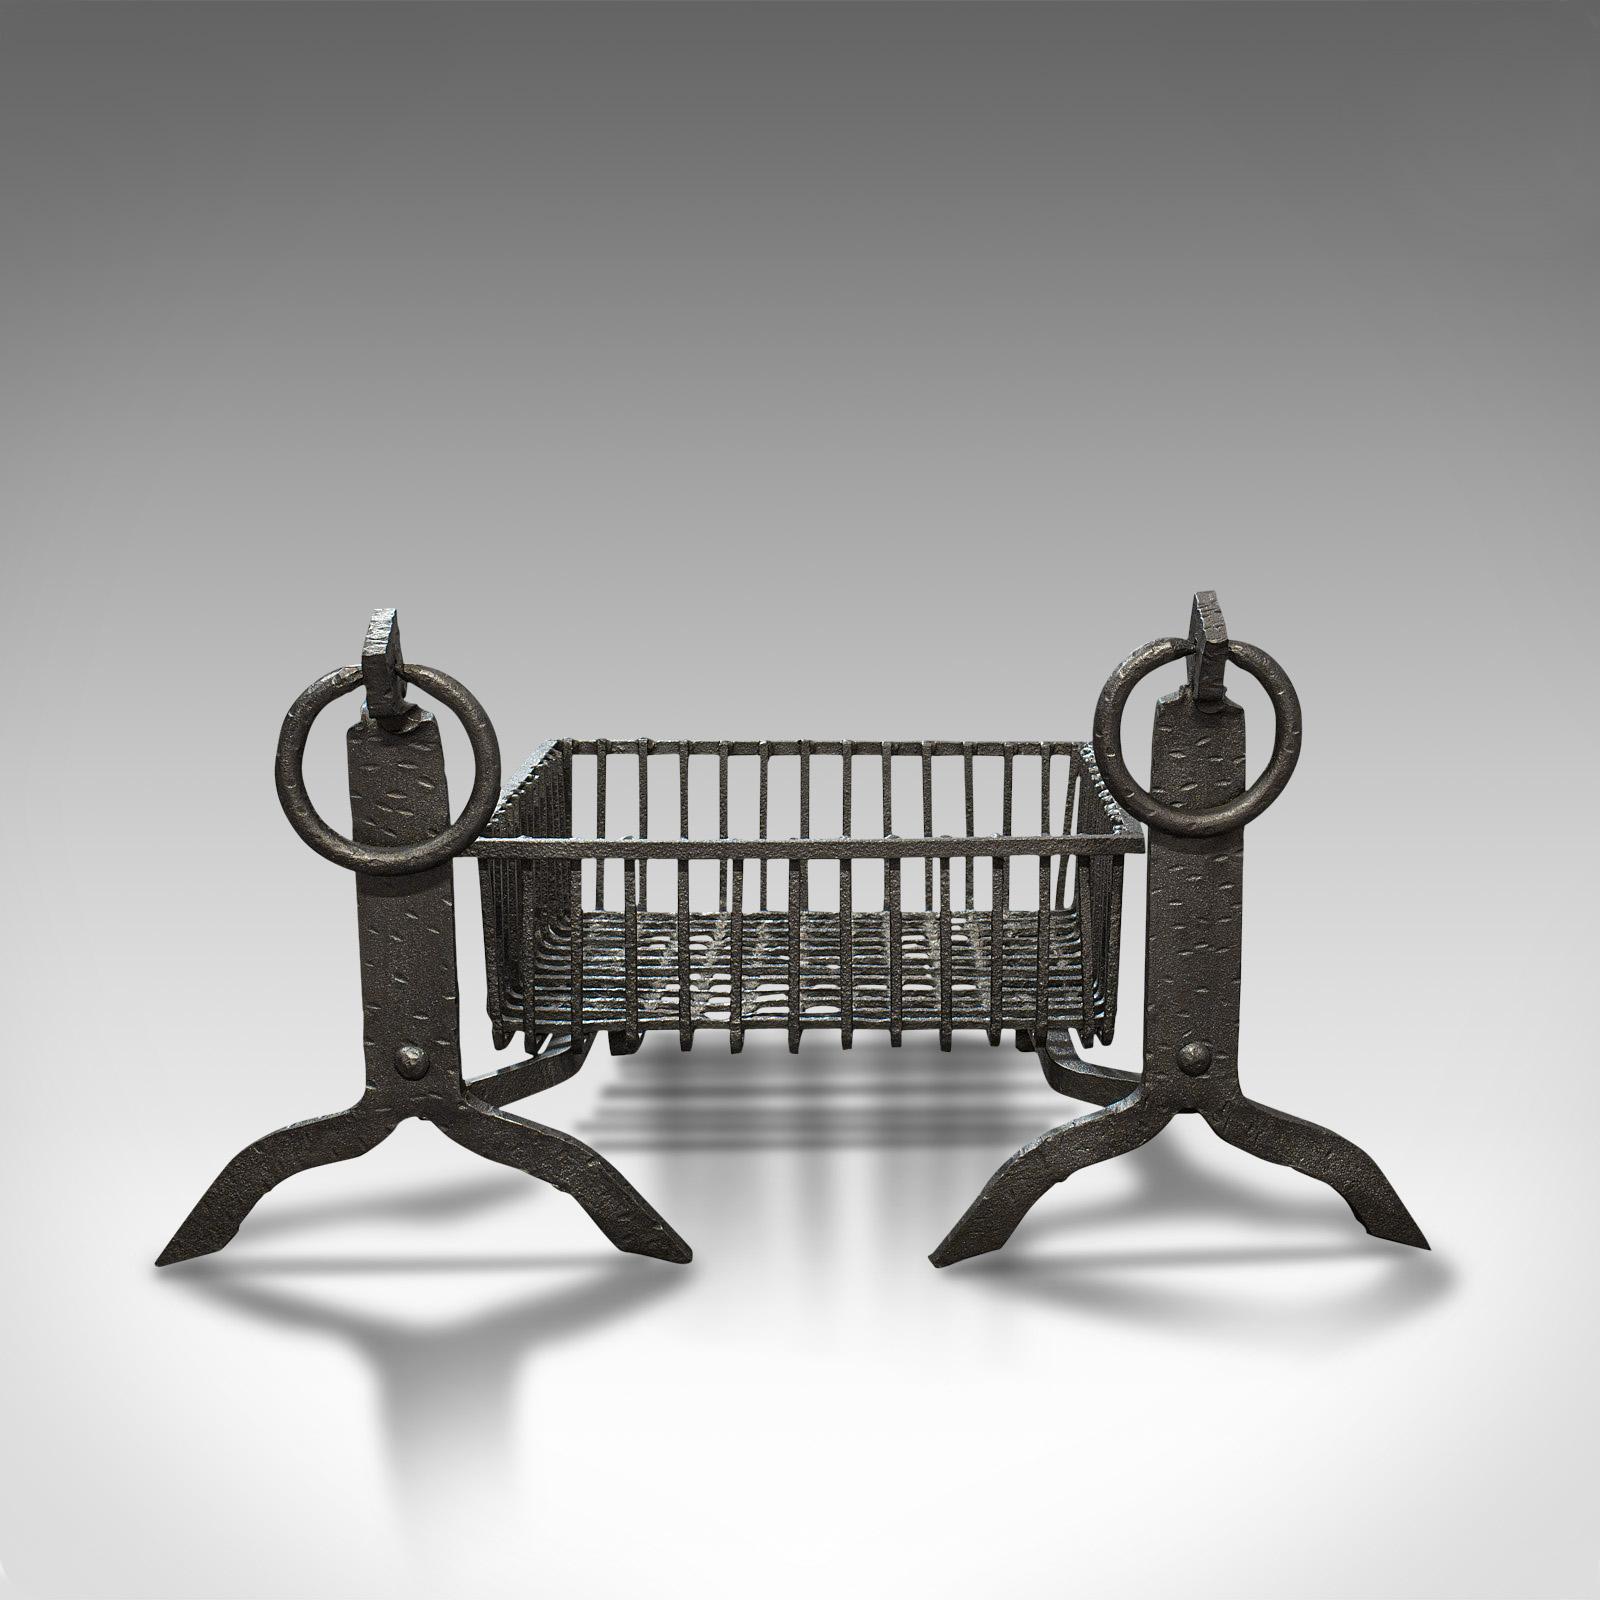 This is an antique fireplace set. An English, cast iron fire basket and pair of andirons, dating to the late Victorian period, circa 1900.

Victorian fireside appeal
Displaying a desirable aged patina
Cast iron in good order with some historical